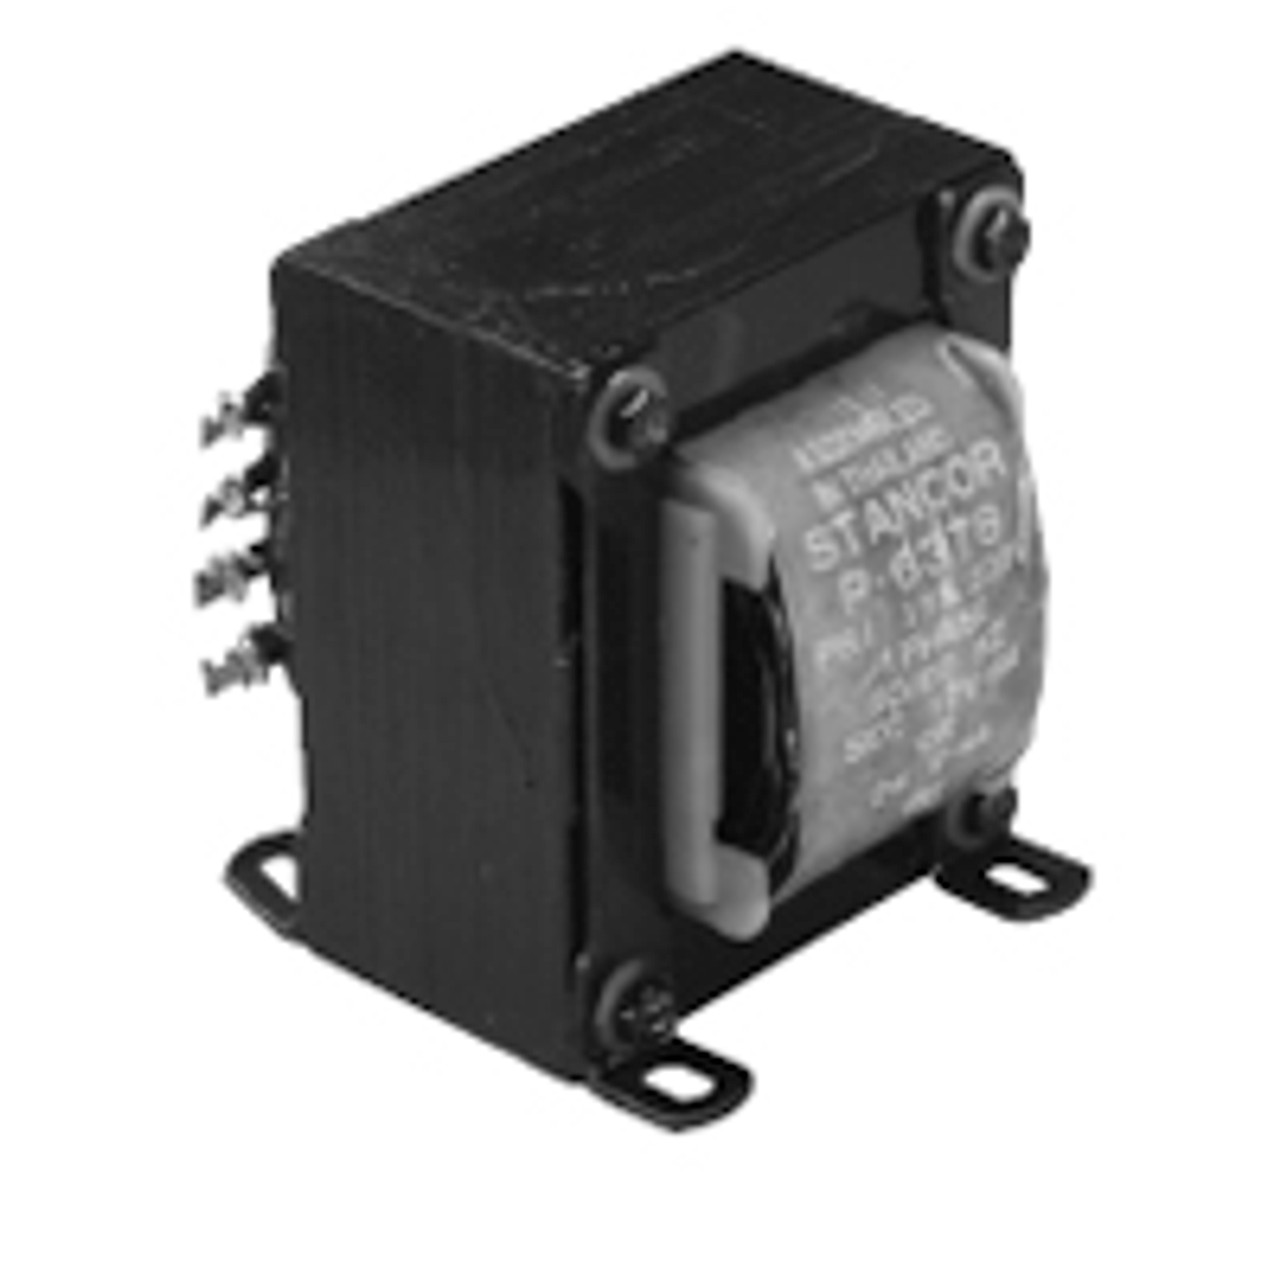 Stancor / White Rodgers P-8668 Power Transformers